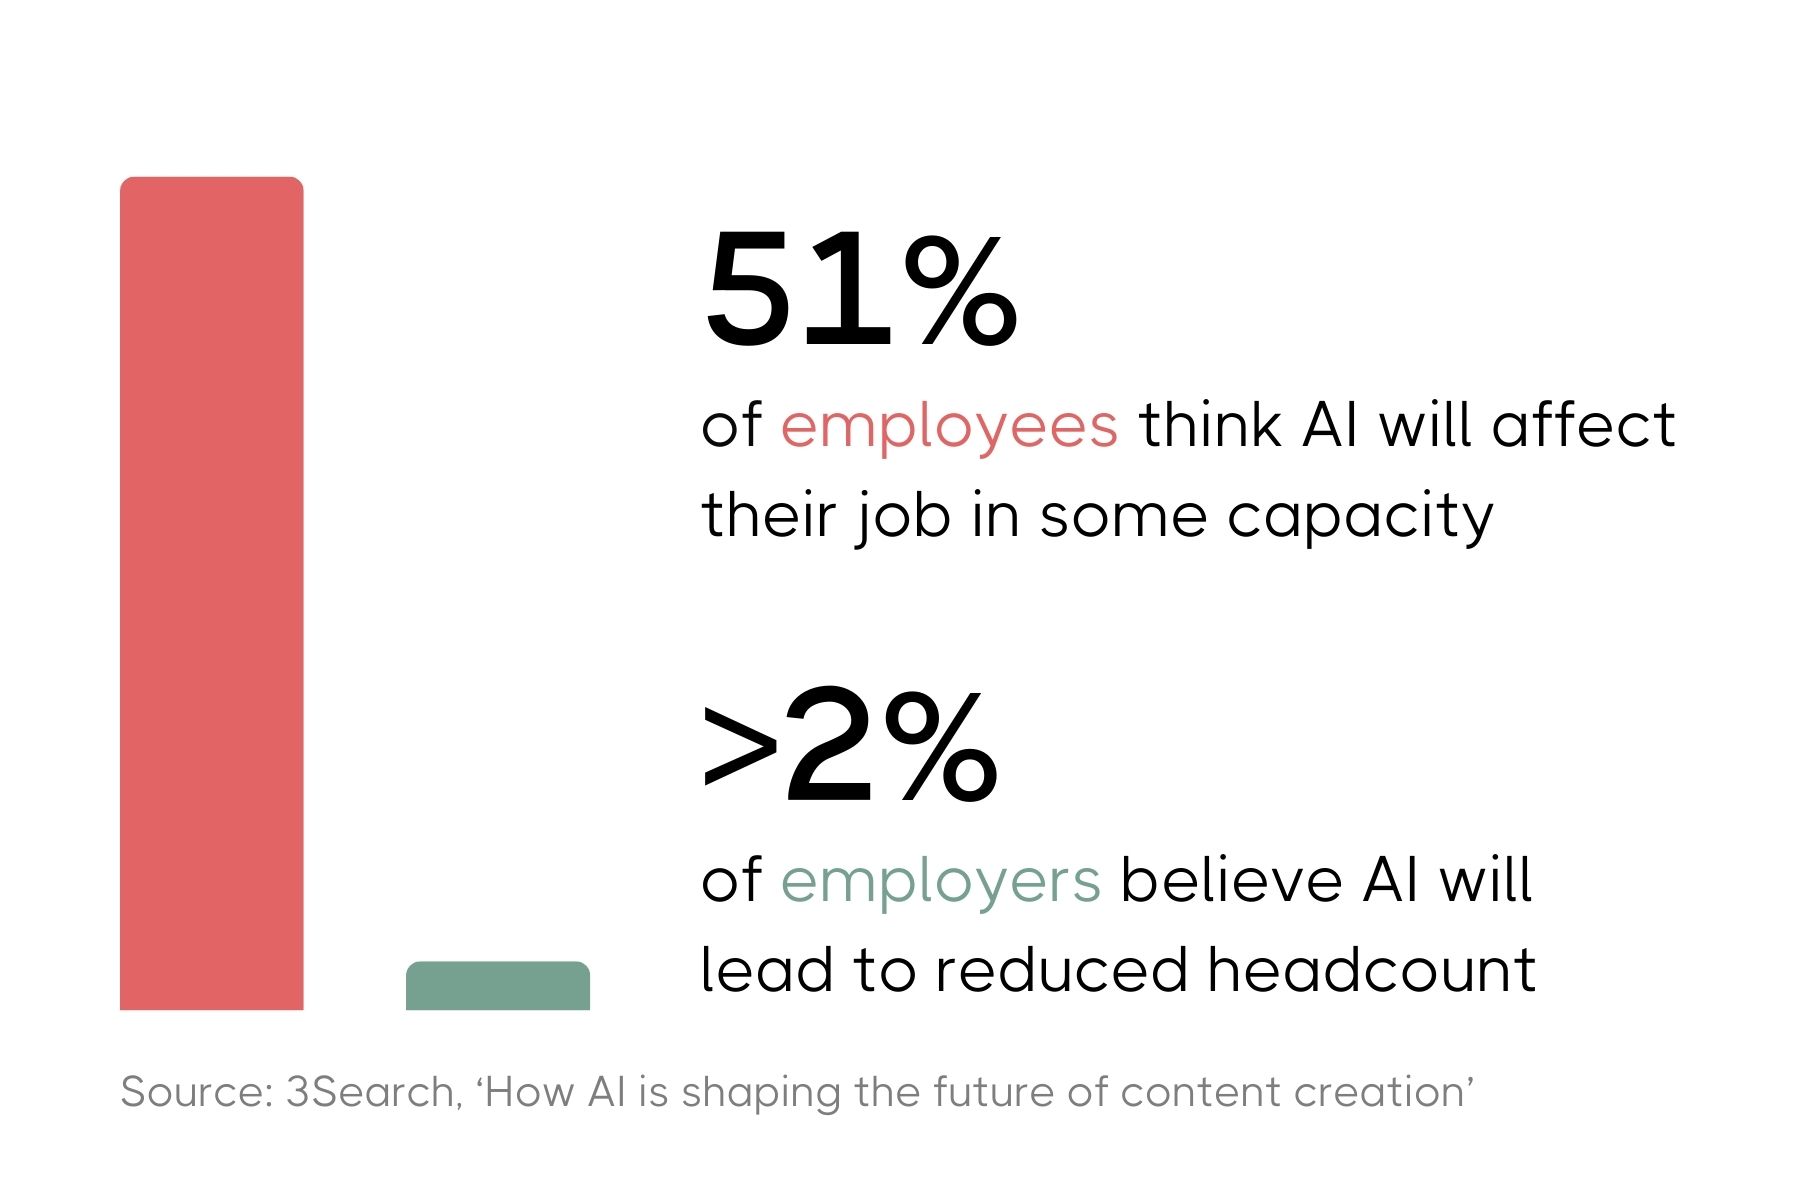 An infographic illustrating statistics on AI's impact on the workforce. It shows a large red bar representing 51% of employees who believe AI will affect their job in some capacity. A smaller green bar represents more than 2% of employers who believe AI will lead to reduced headcount. The source noted at the bottom is '3Search, How AI is shaping the future of content creation'.